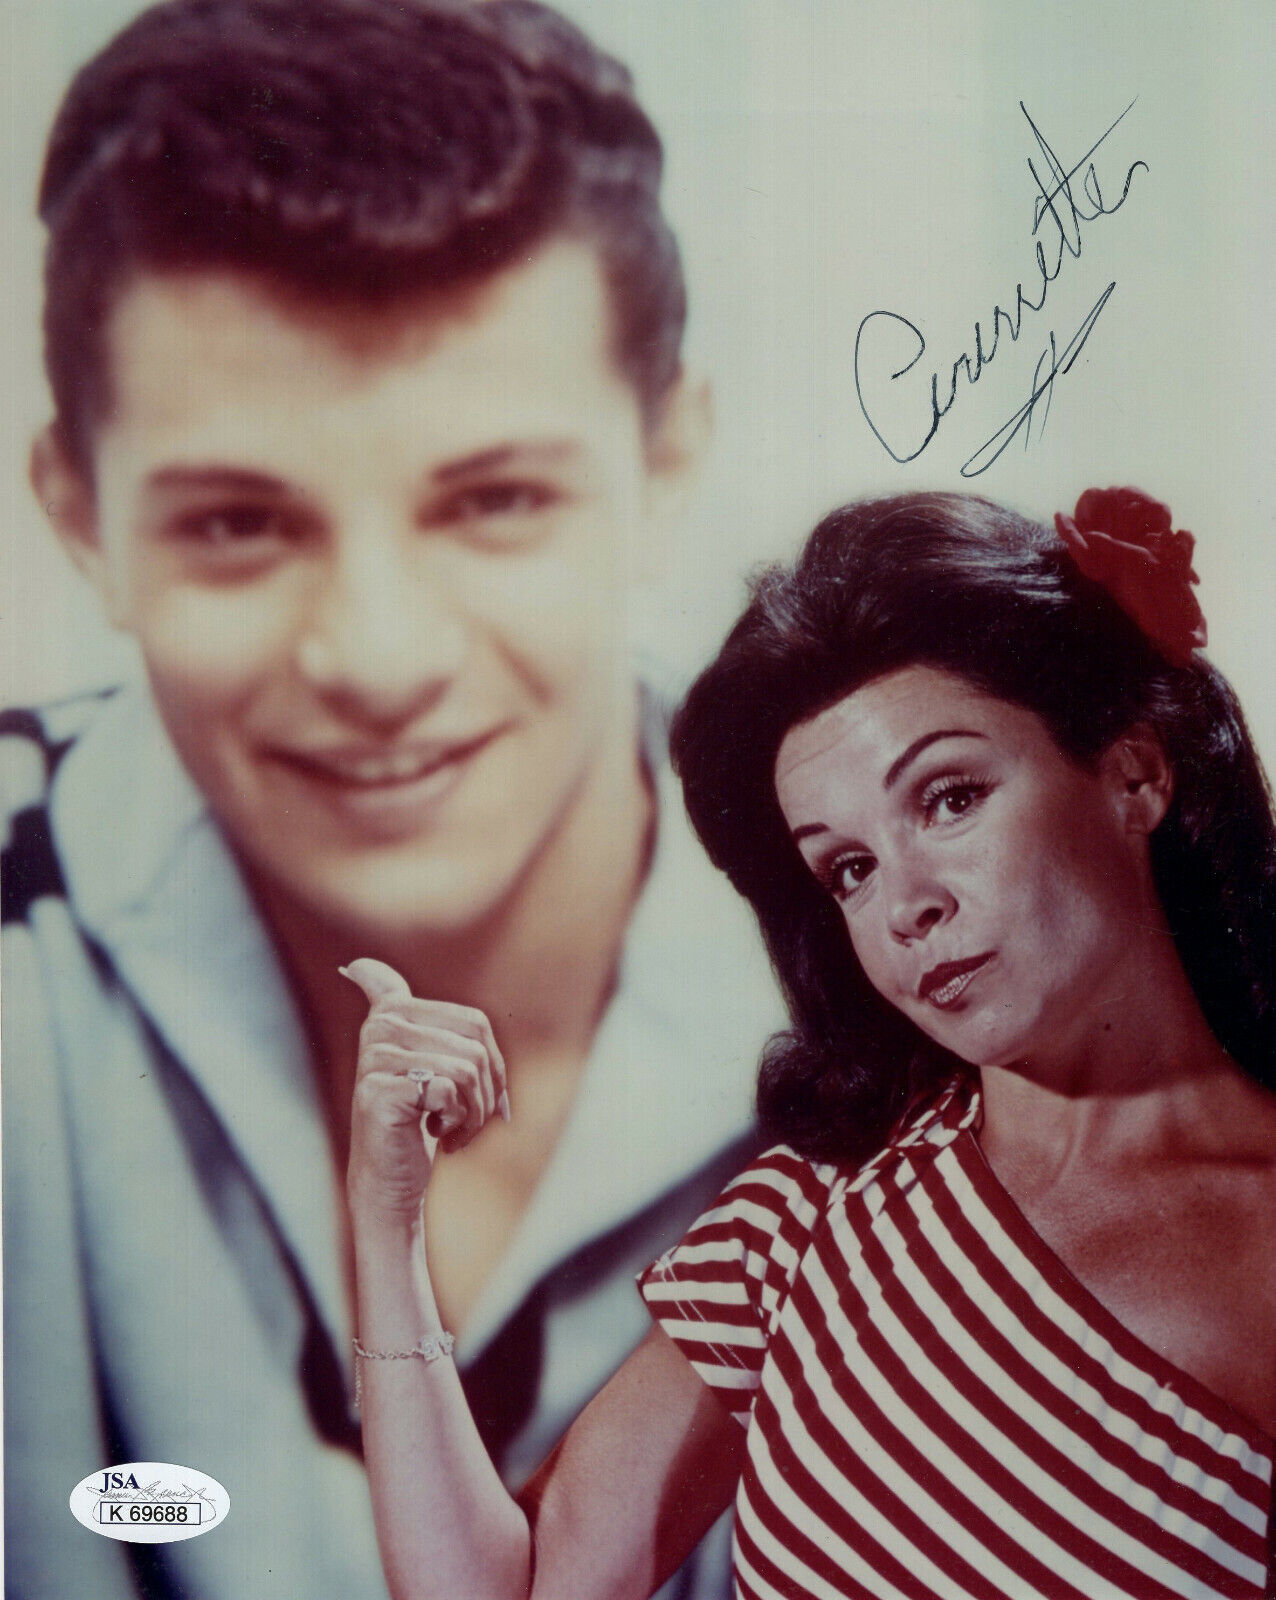 ANNETTE FUNICELLO HAND SIGNED 8x10 COLOR PHOTO        GORGEOUS POSE         JSA